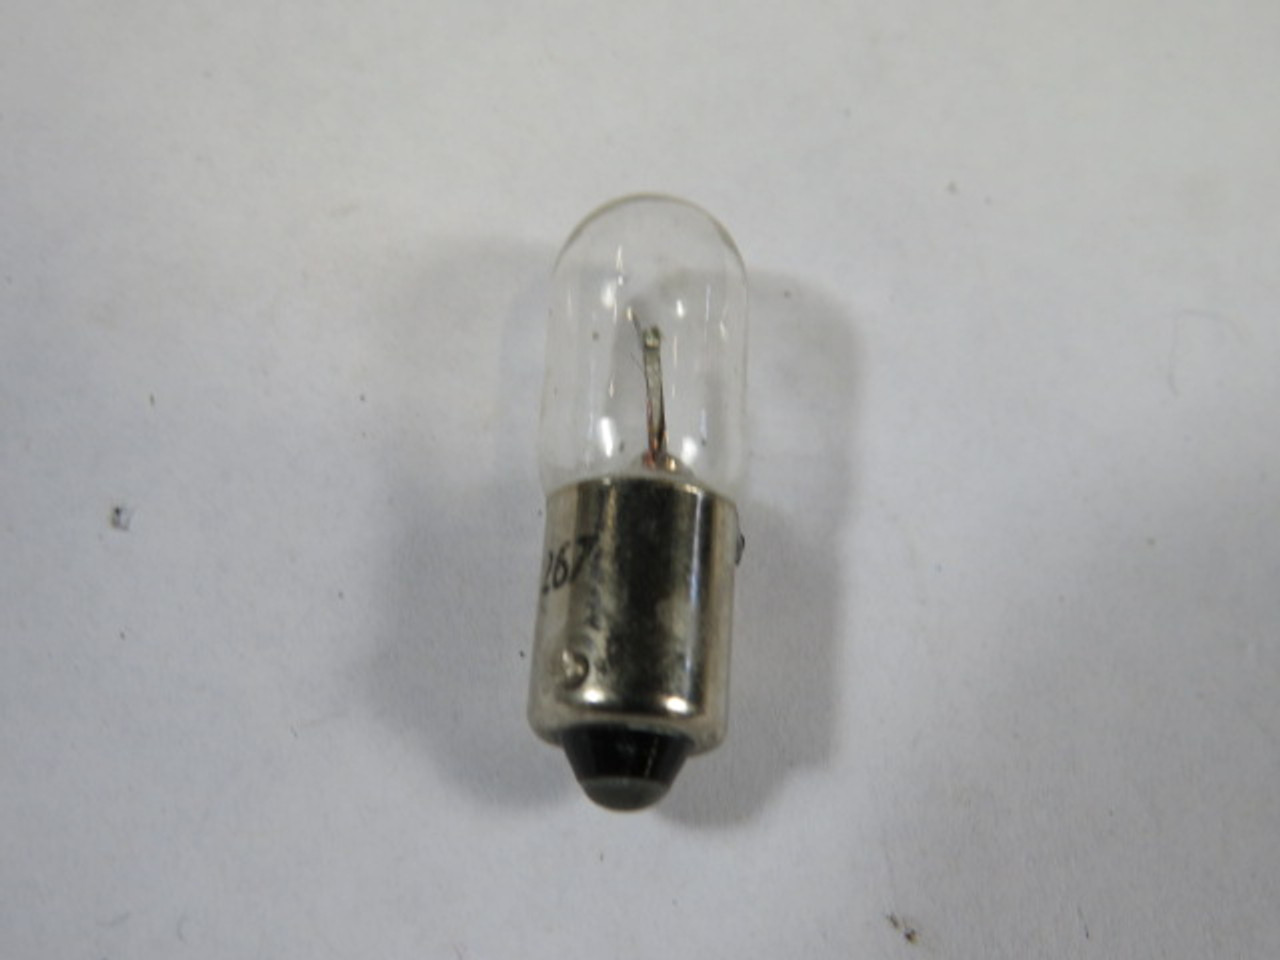 Haskel 267 Miniature Lamp 6.3V 1W Lot of 3 USED